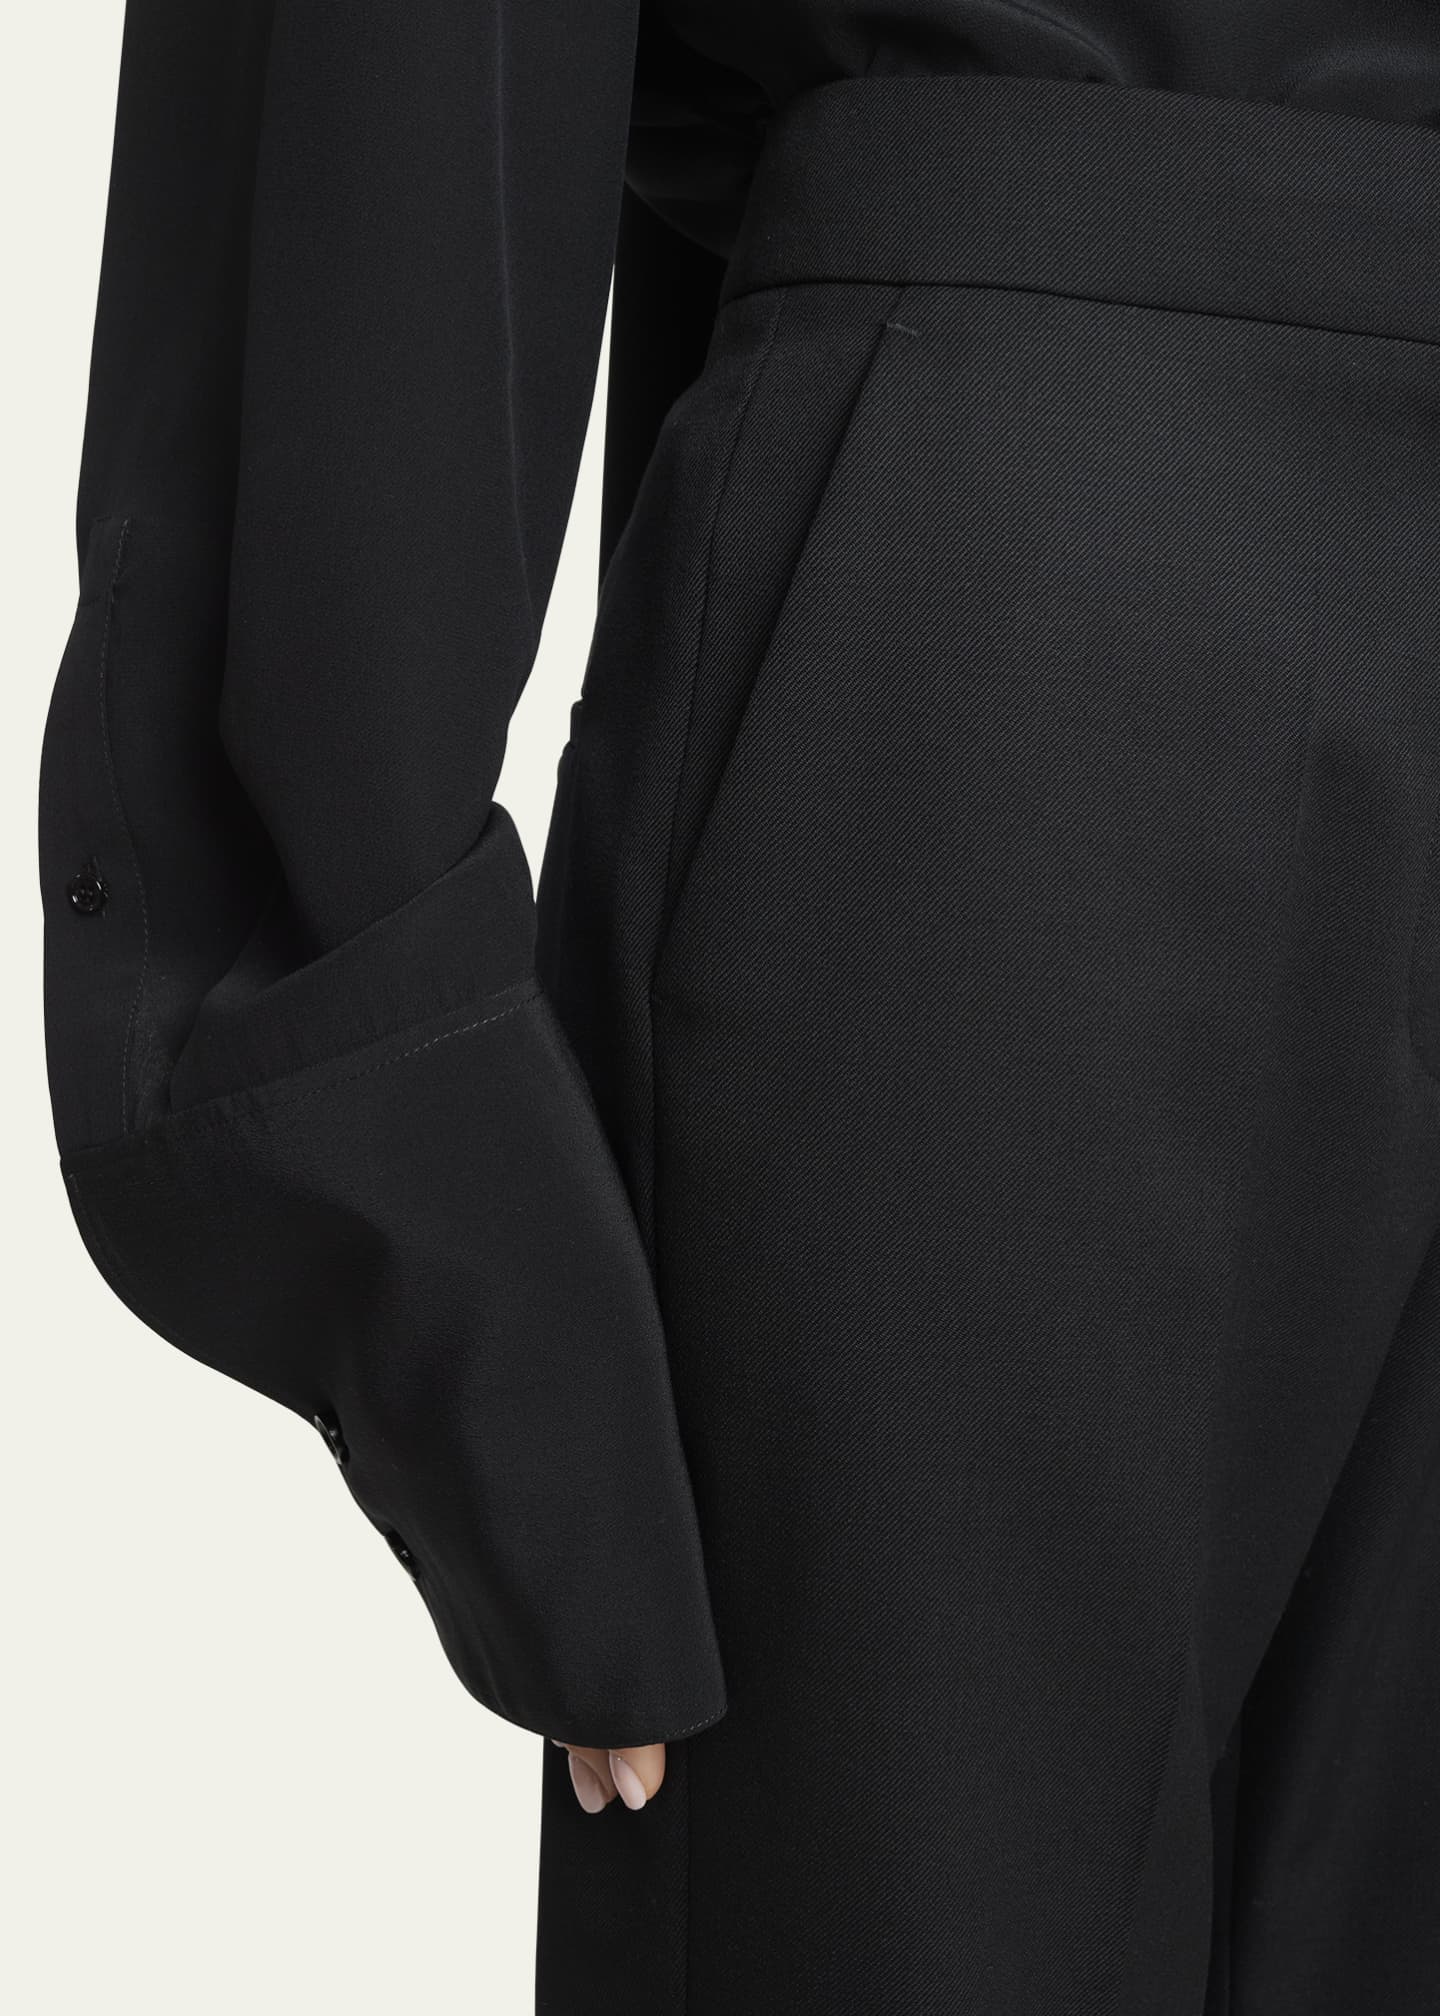 Givenchy Flare Suiting Trousers - Bergdorf Goodman